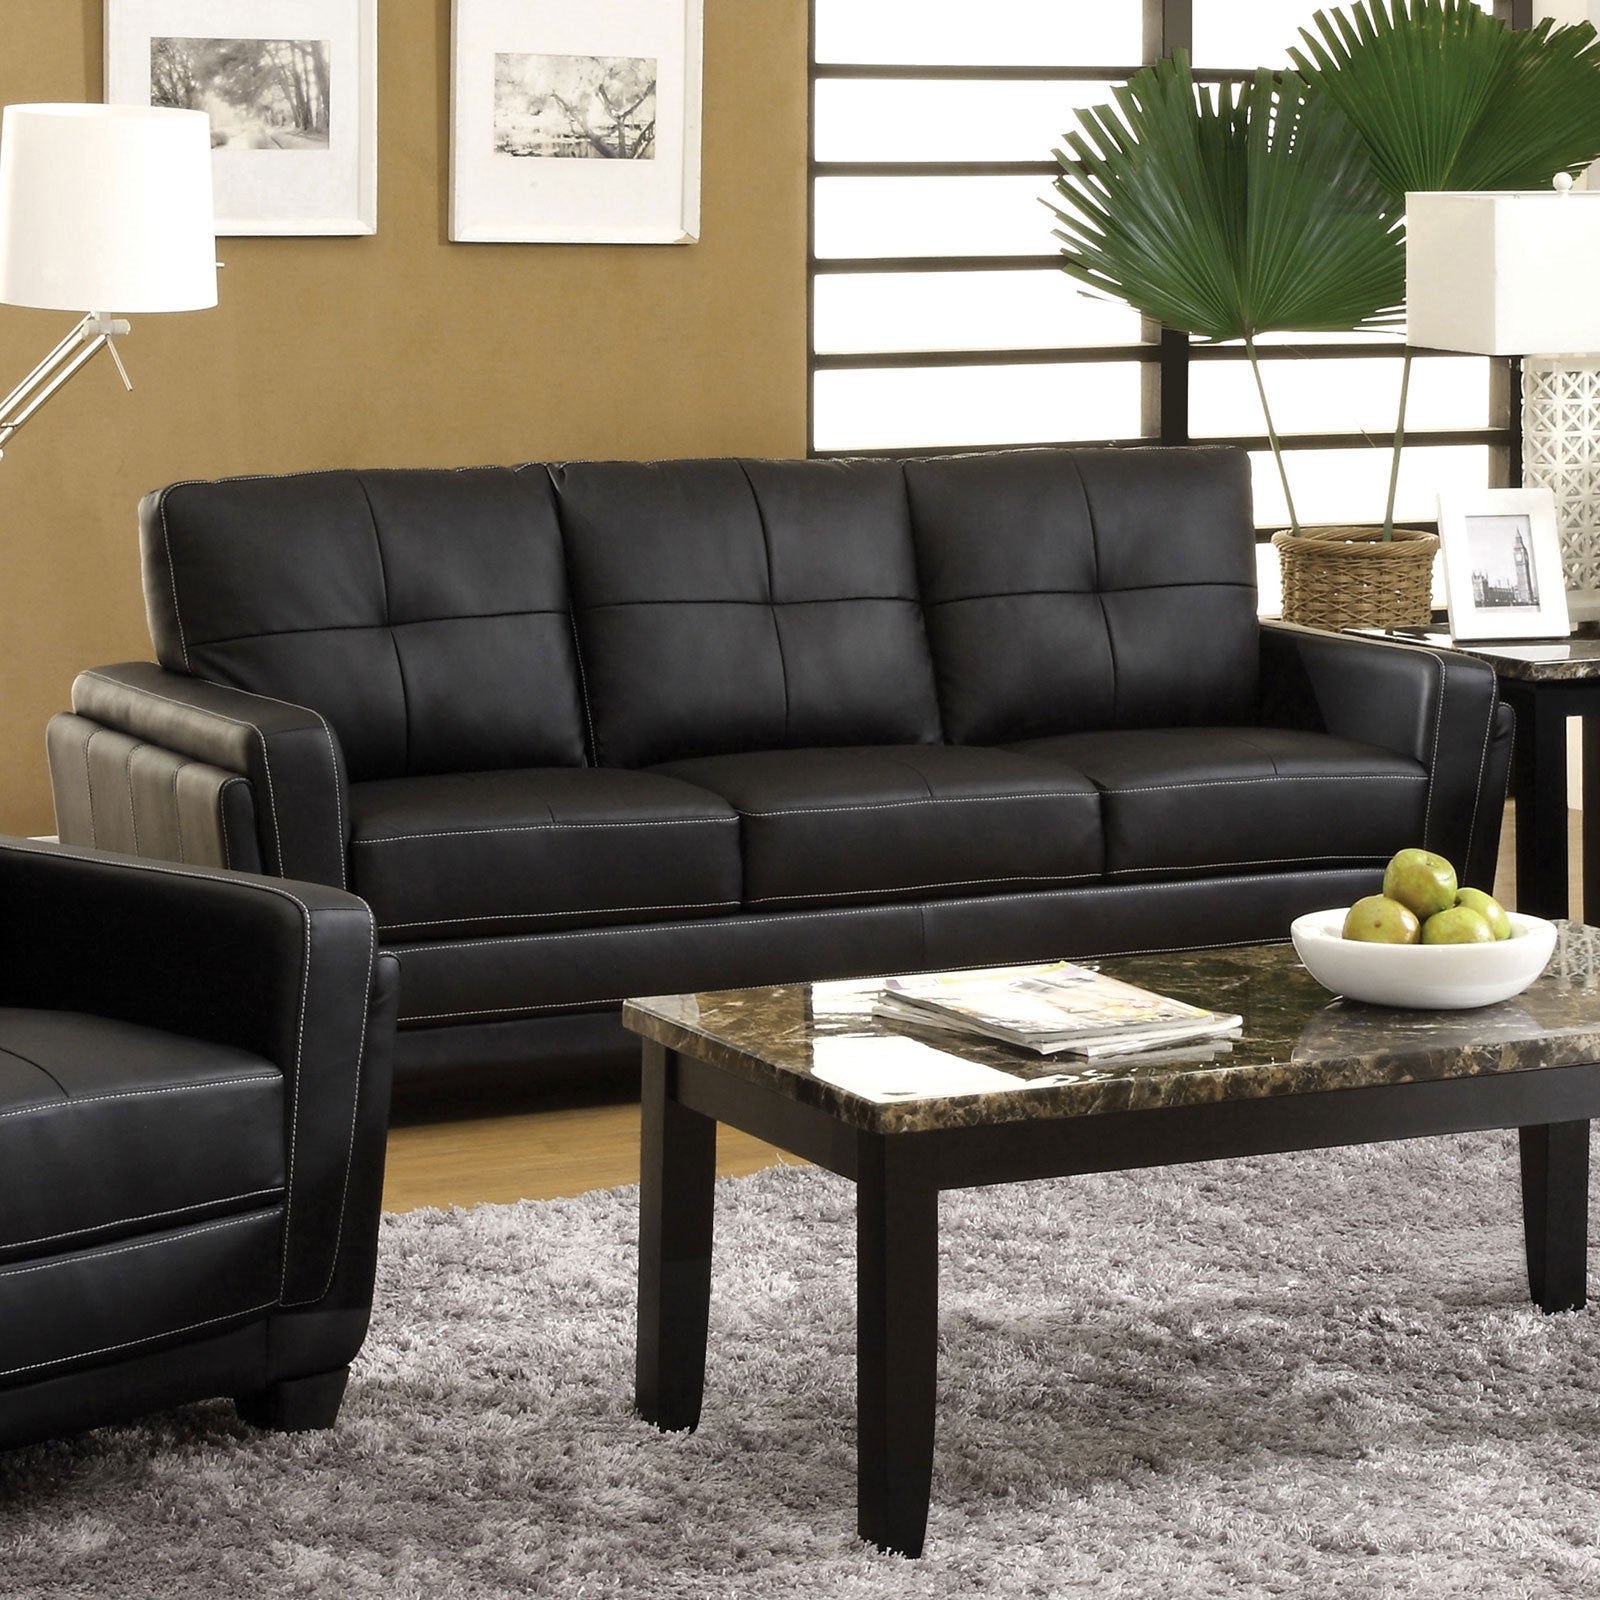 Opoiar Black Faux Leather Futon Sofa Bed Couch,3 Russia